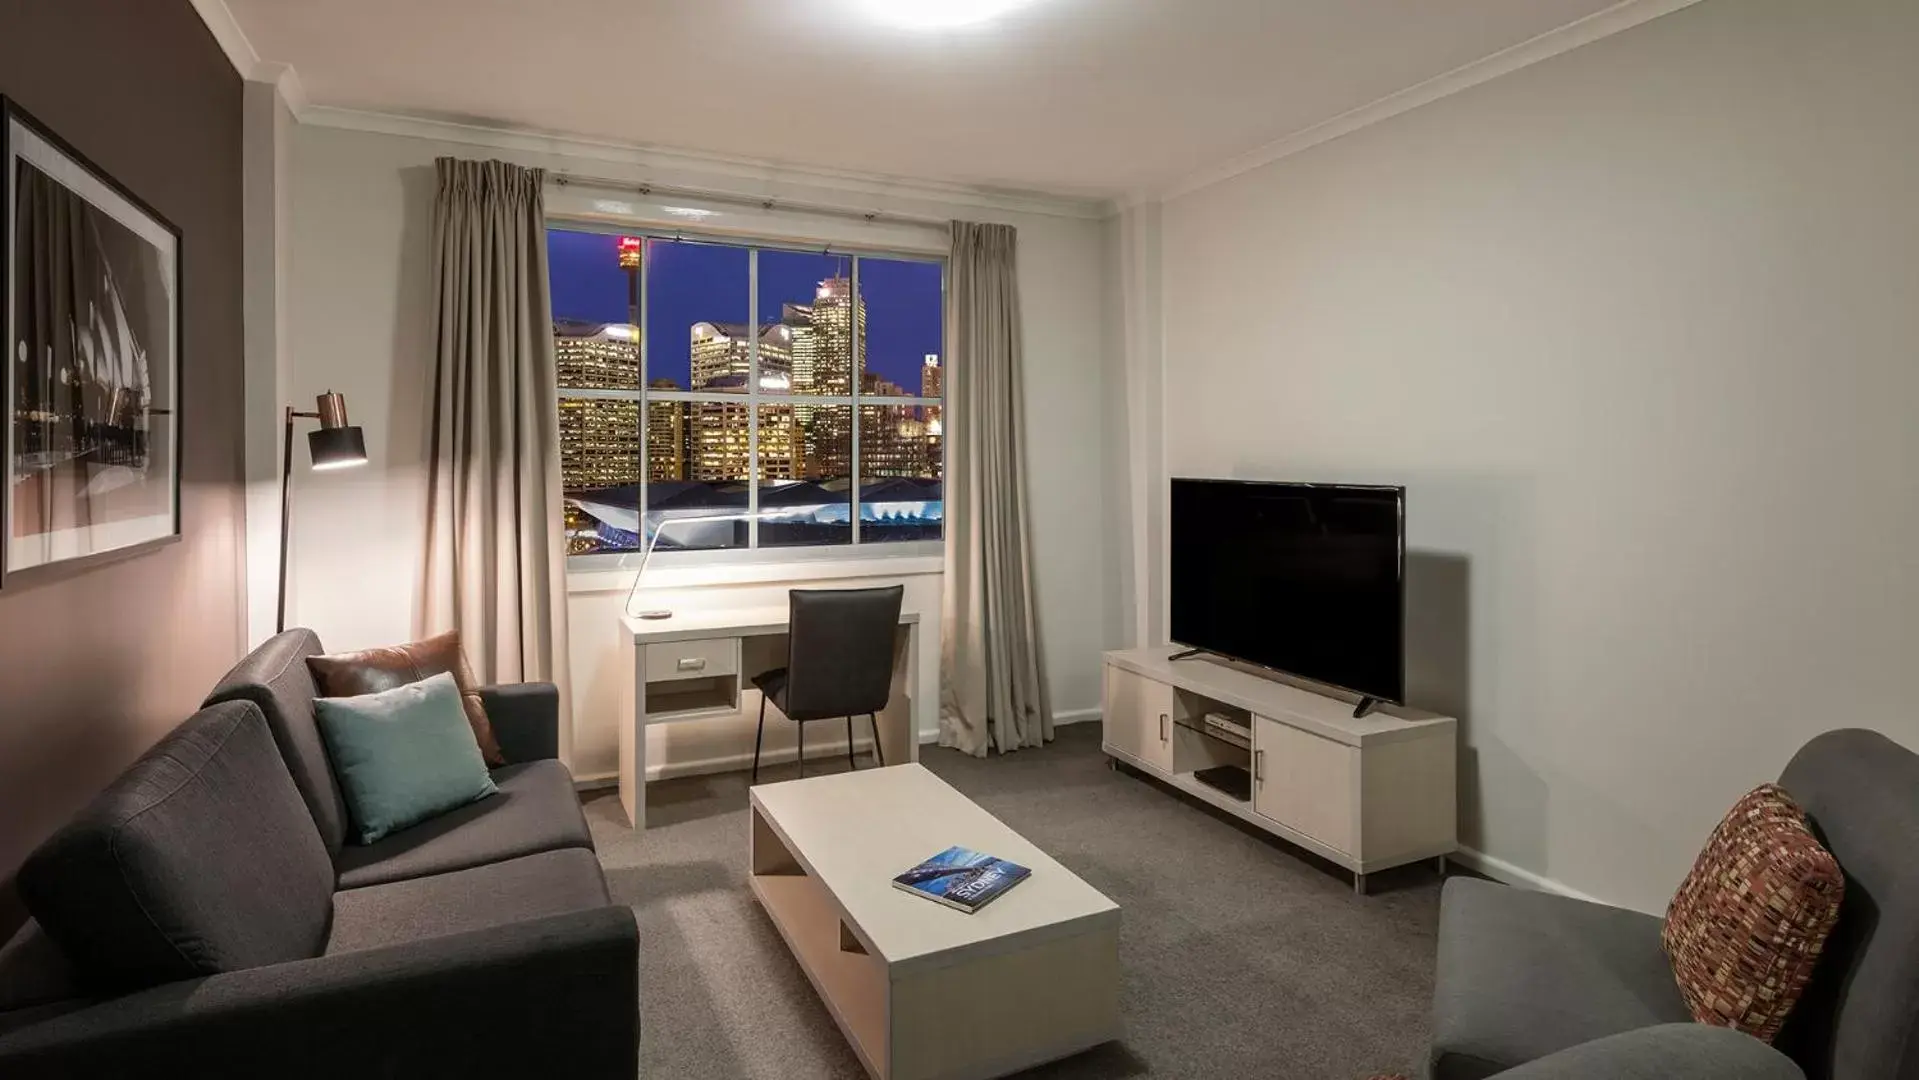 One-Bedroom Apartment with City View - No Housekeeping in Oaks Sydney Goldsbrough Suites